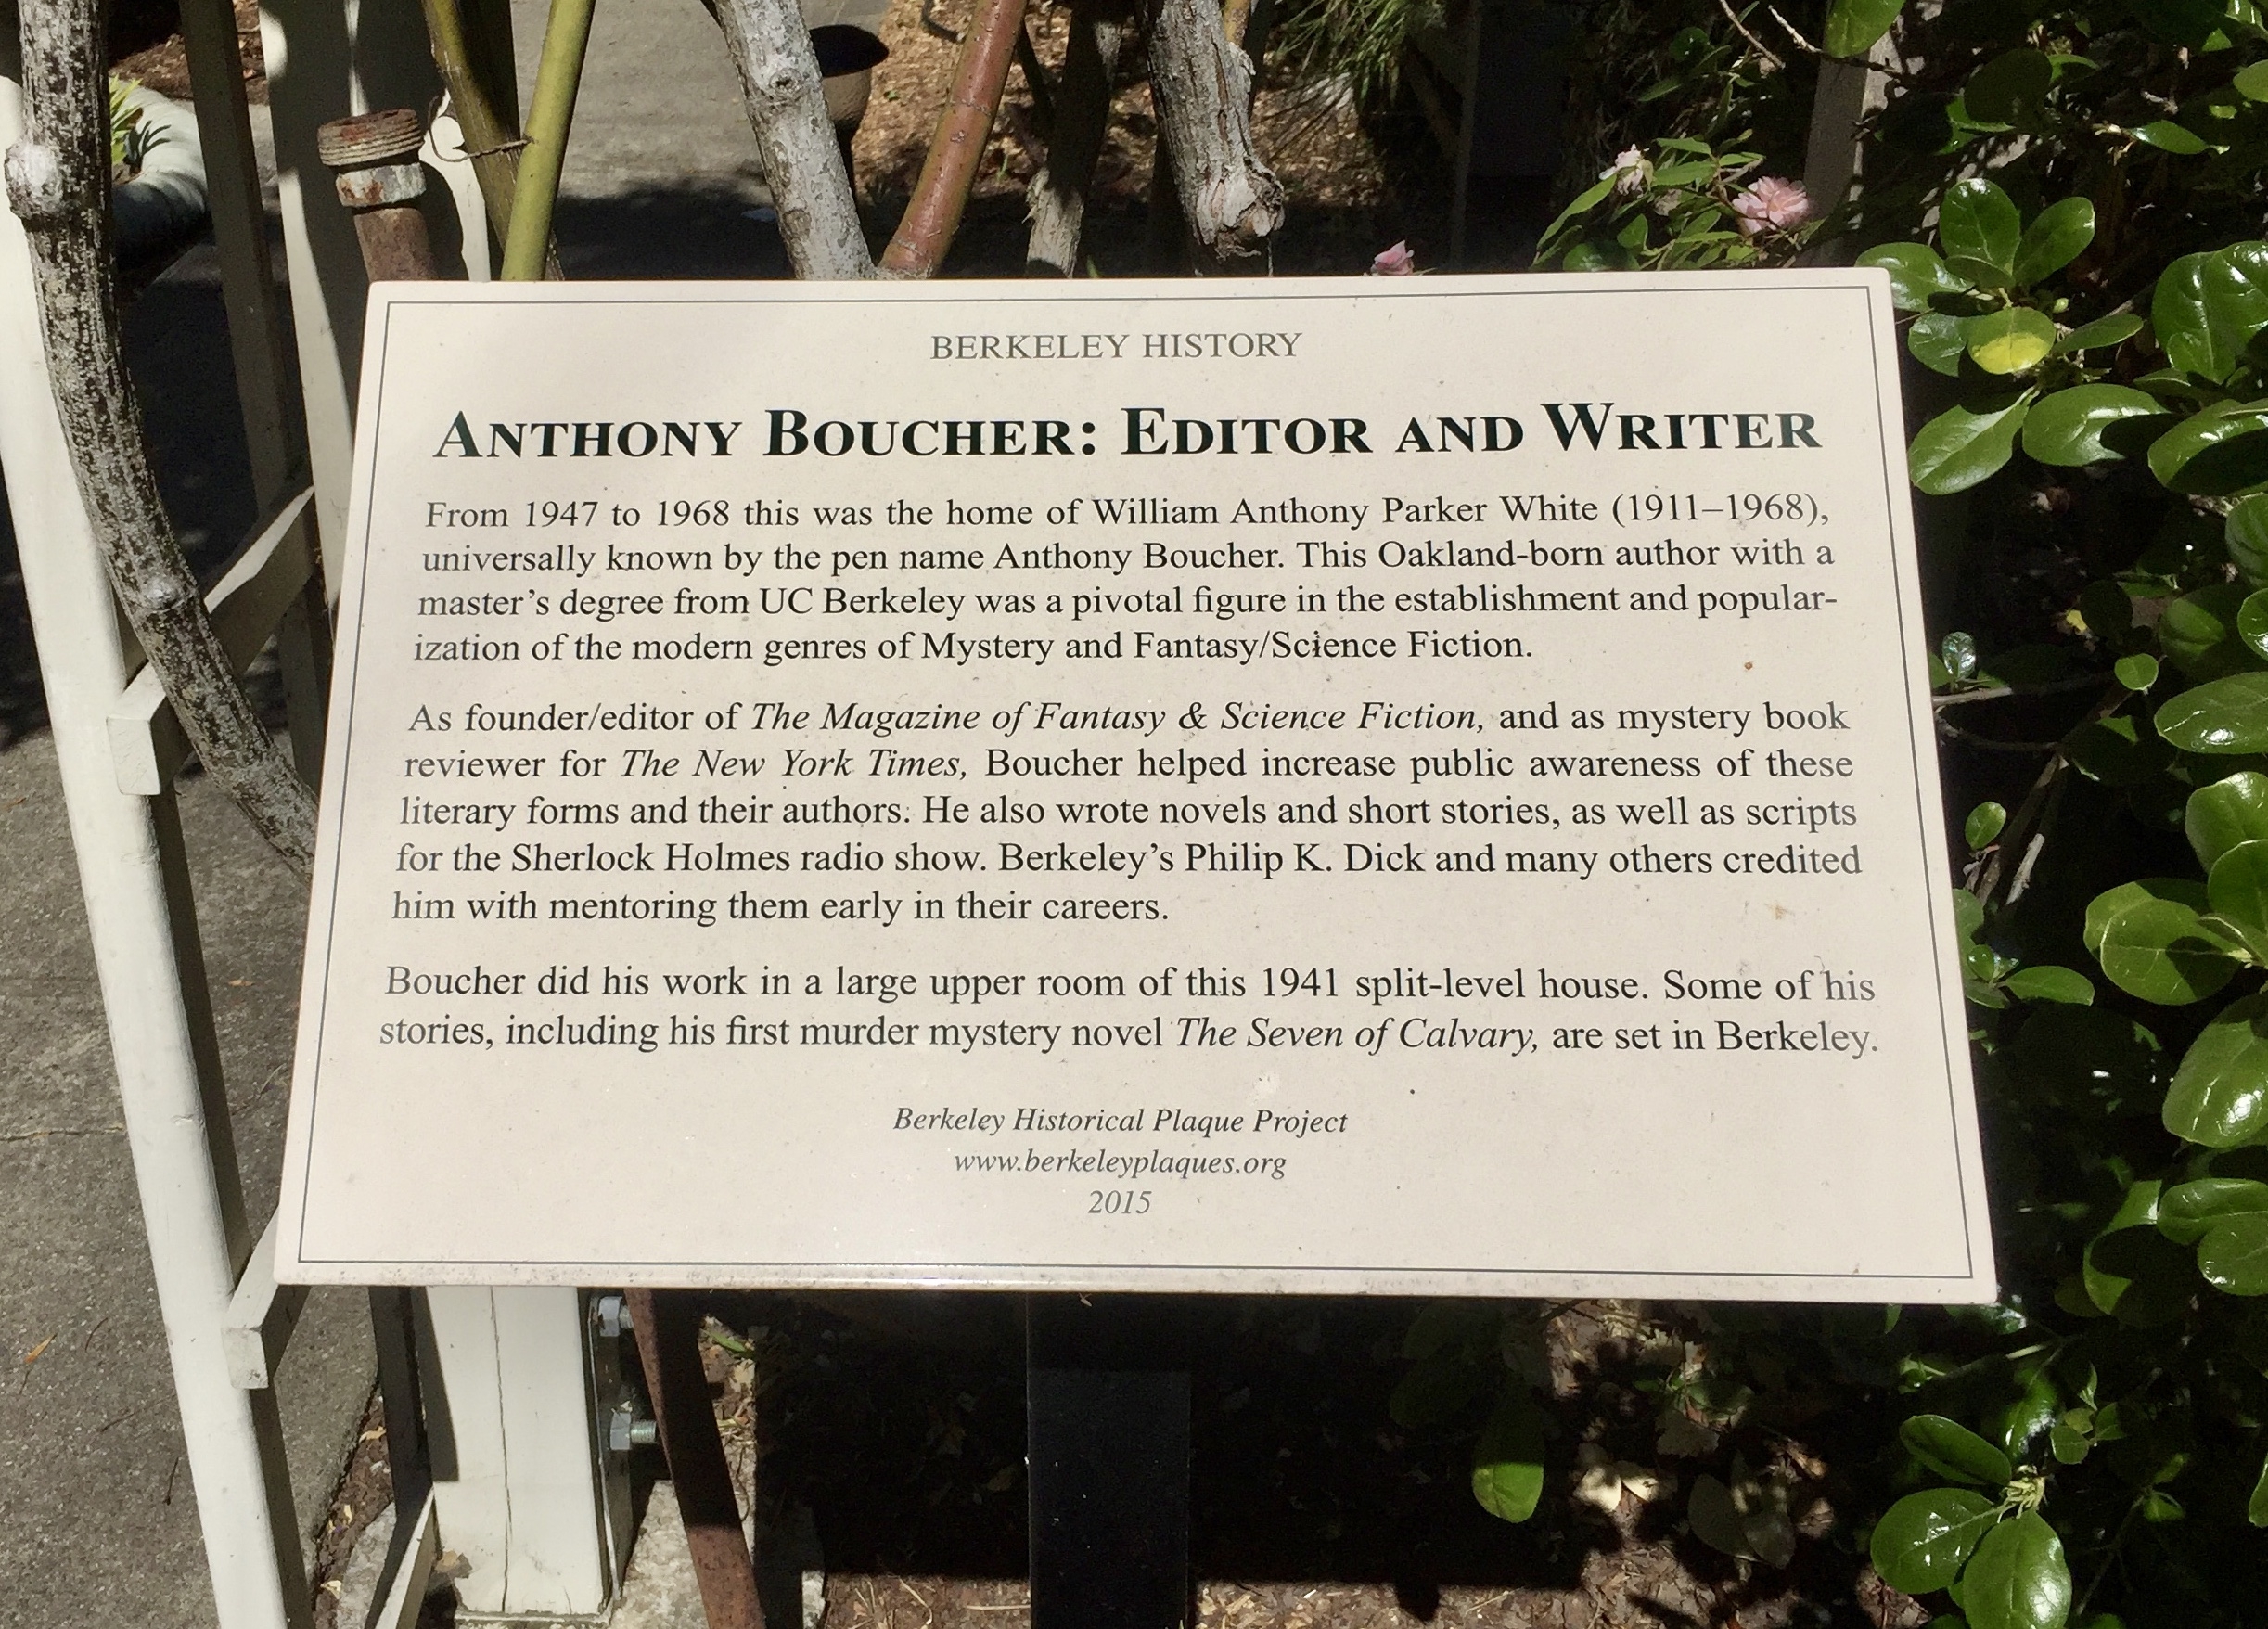 Anthony Boucher: Editor and Writer Marker